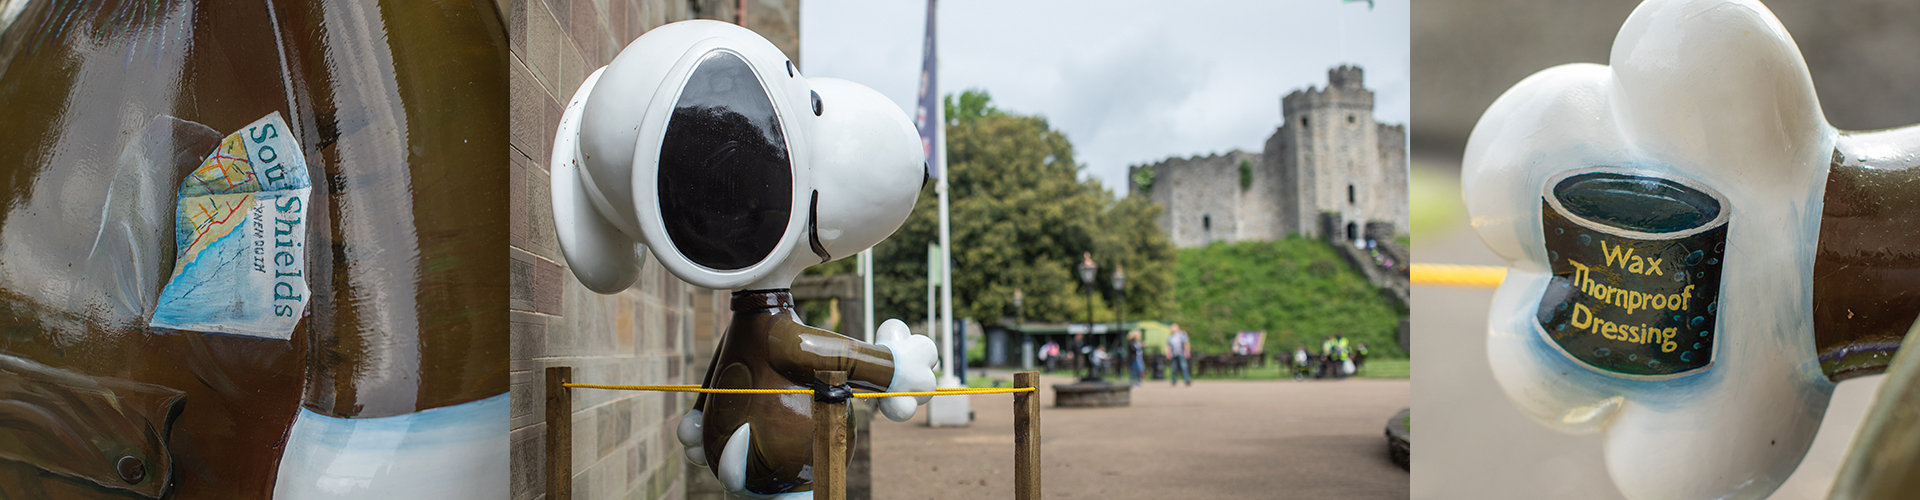 Barkbour: The Story Behind Our Illustrated Snoopy Sculpture 